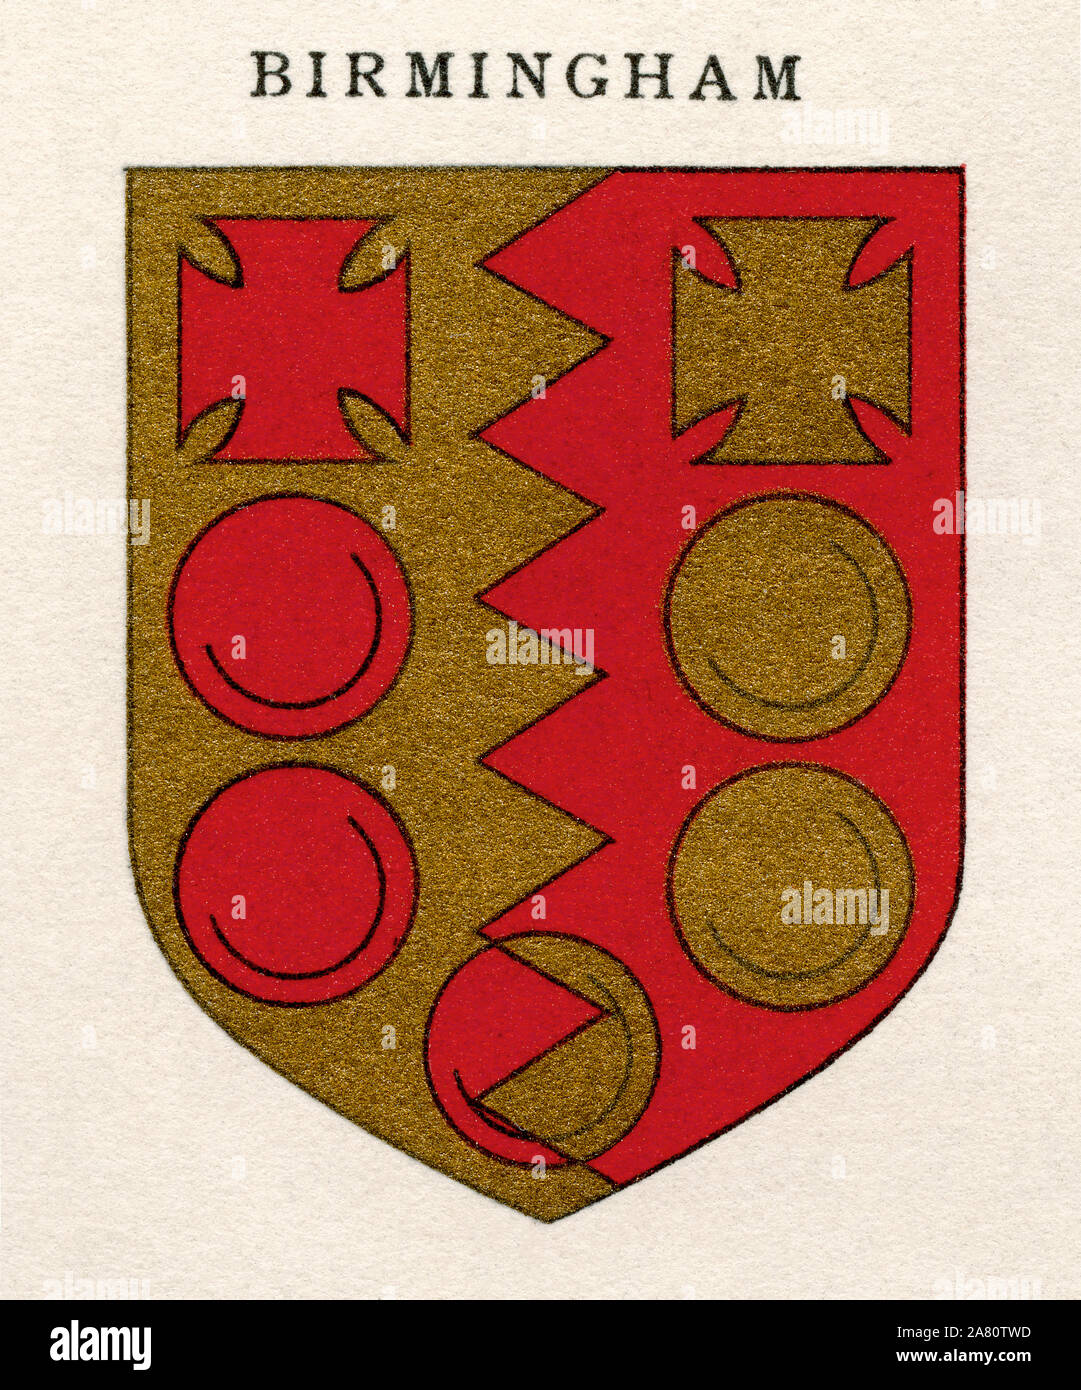 Coat of arms of the Diocese of Birmingham.  From Cathedrals, published 1926. Stock Photo